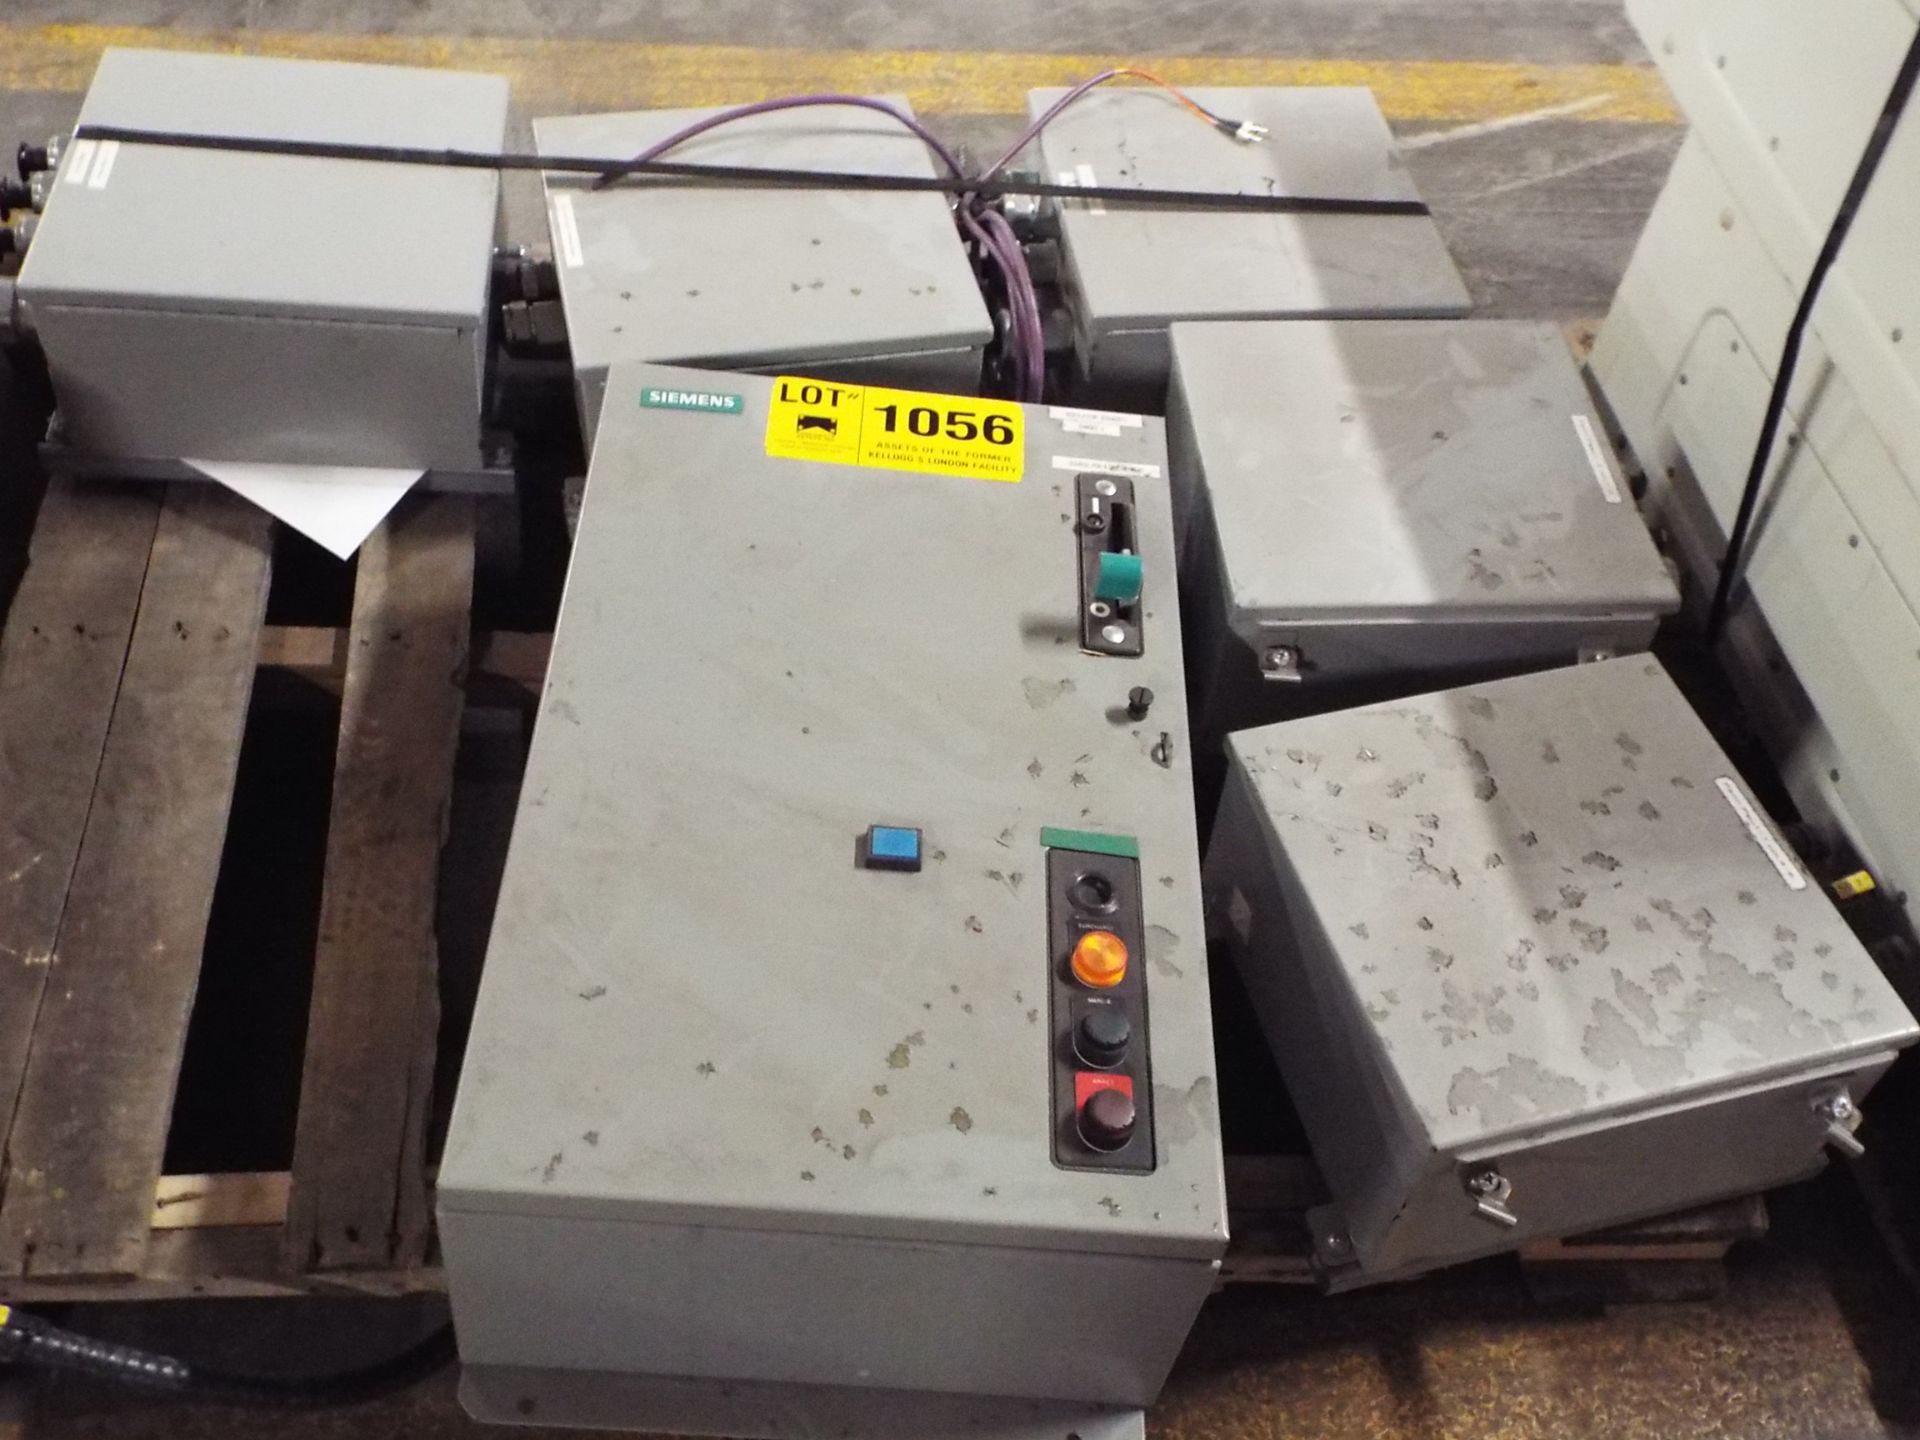 LOT/ SIEMENS CONTROL BOX AND (2) JUNCTION BOXES